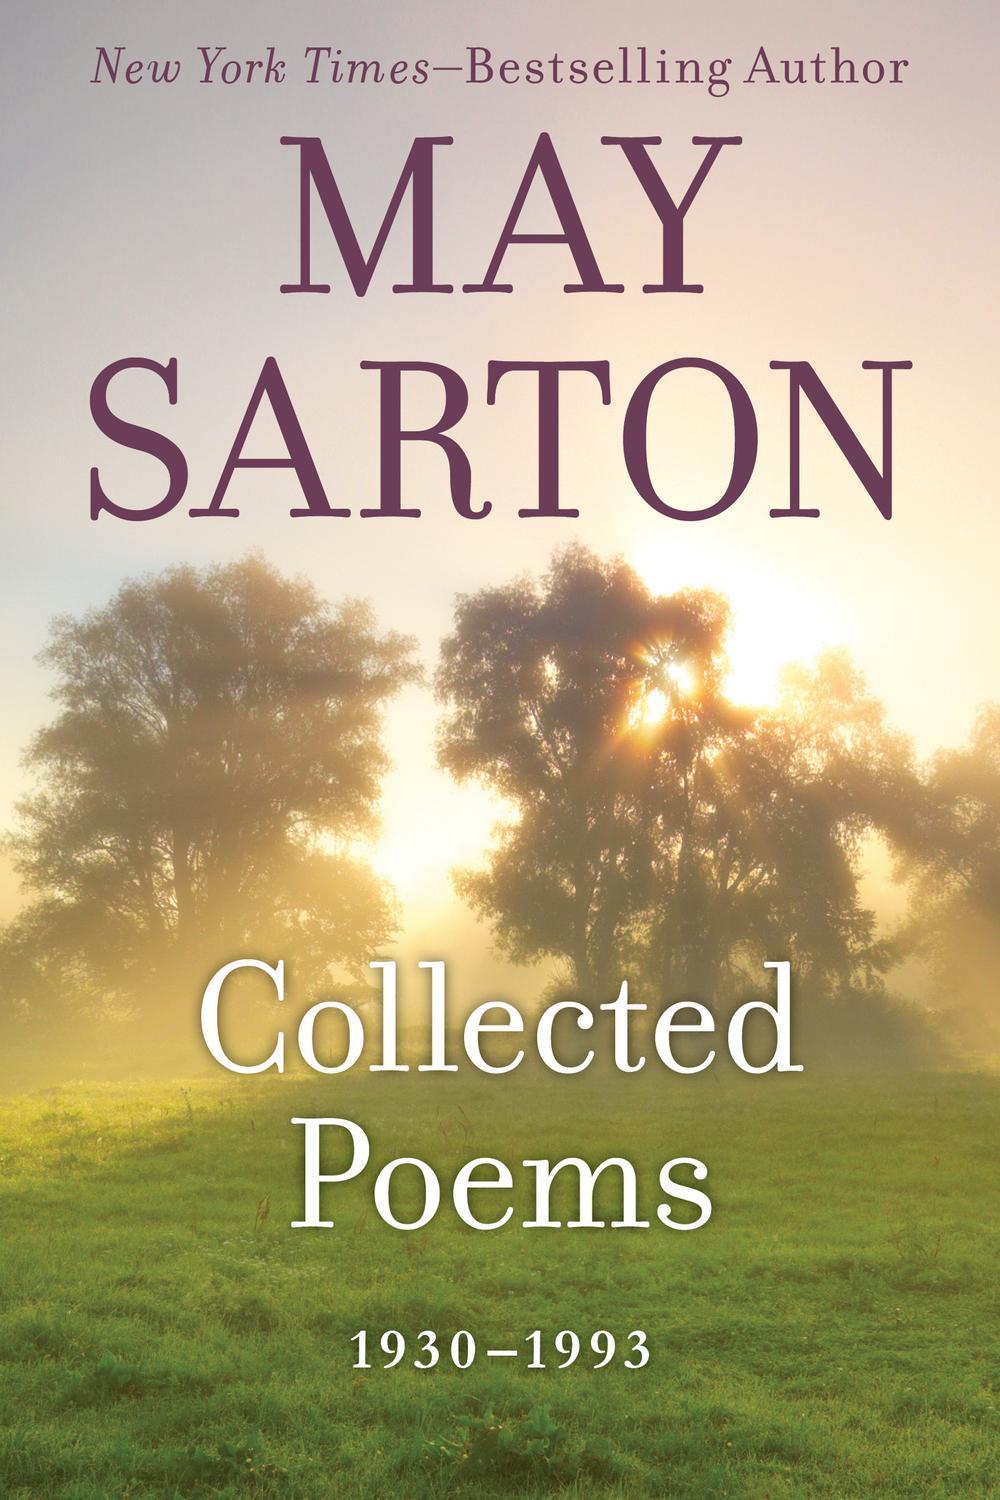 PDF] Collected Poems by May Sarton | Perlego